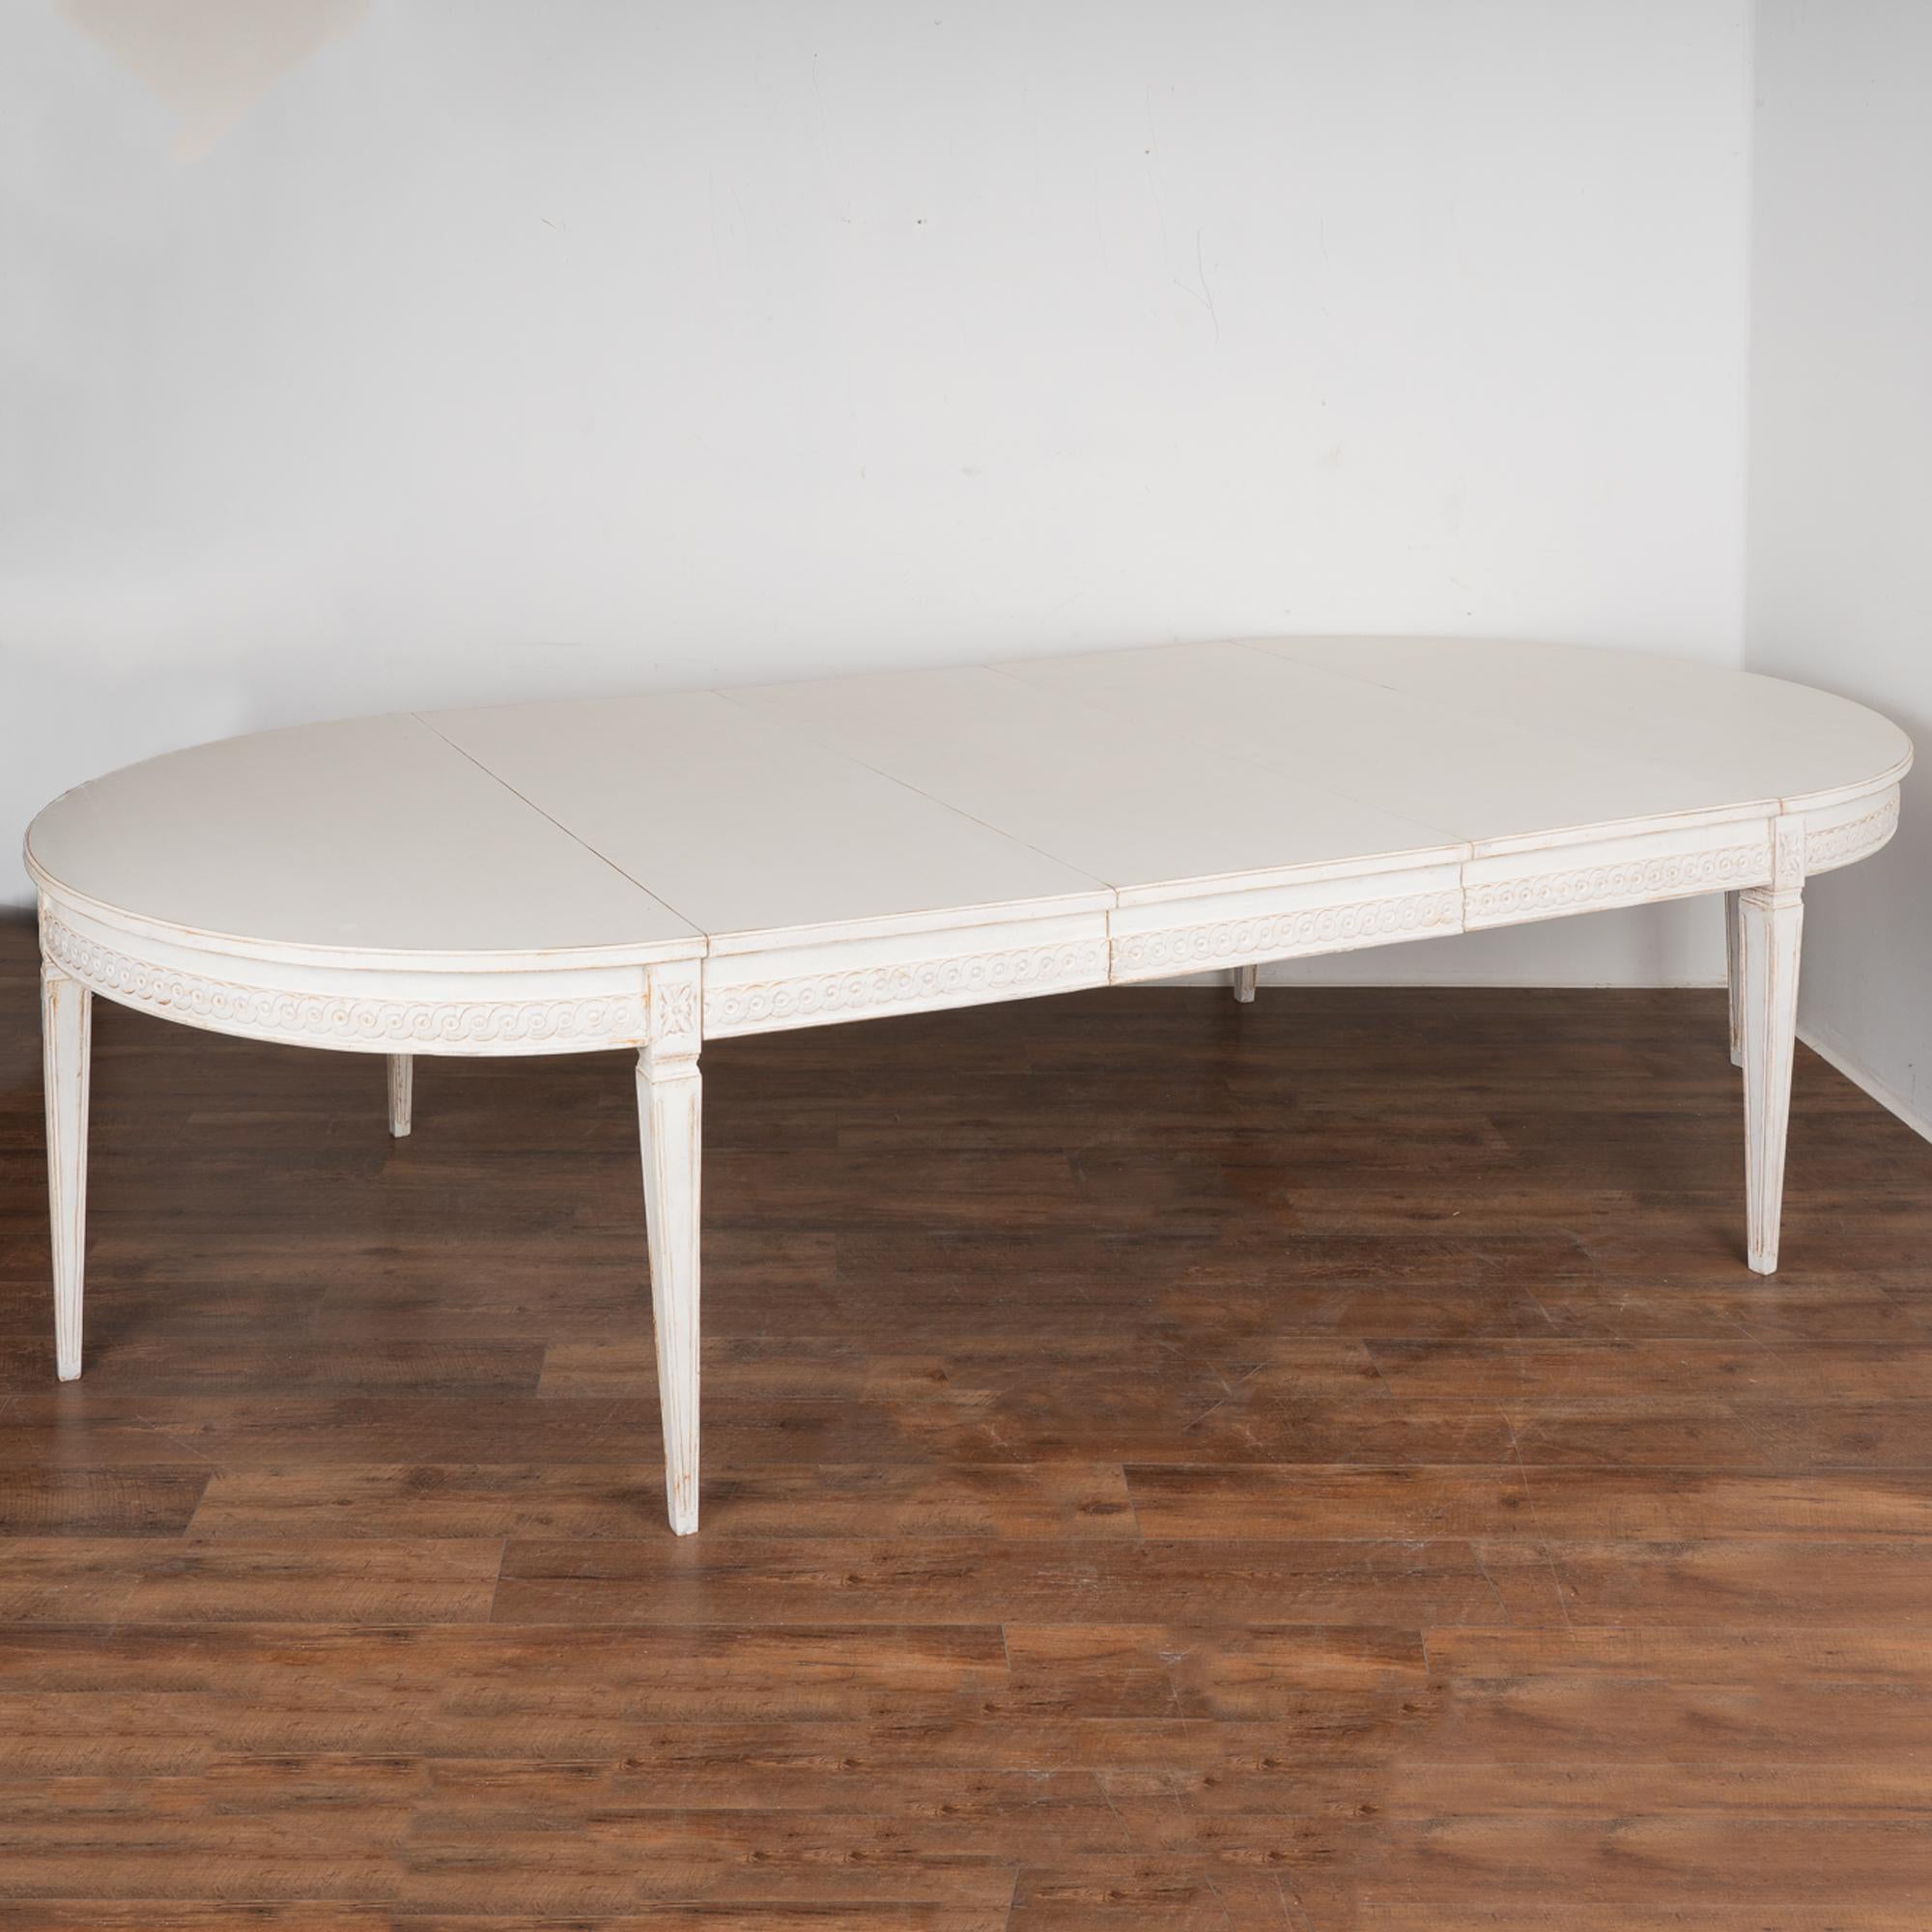 Decorative carving along the skirt and graceful lines are seen in the tapered legs of this incredible Swedish dining table, which extends to a remarkable length of just under 11 feet.
It is the newer, professionally applied white layered painted